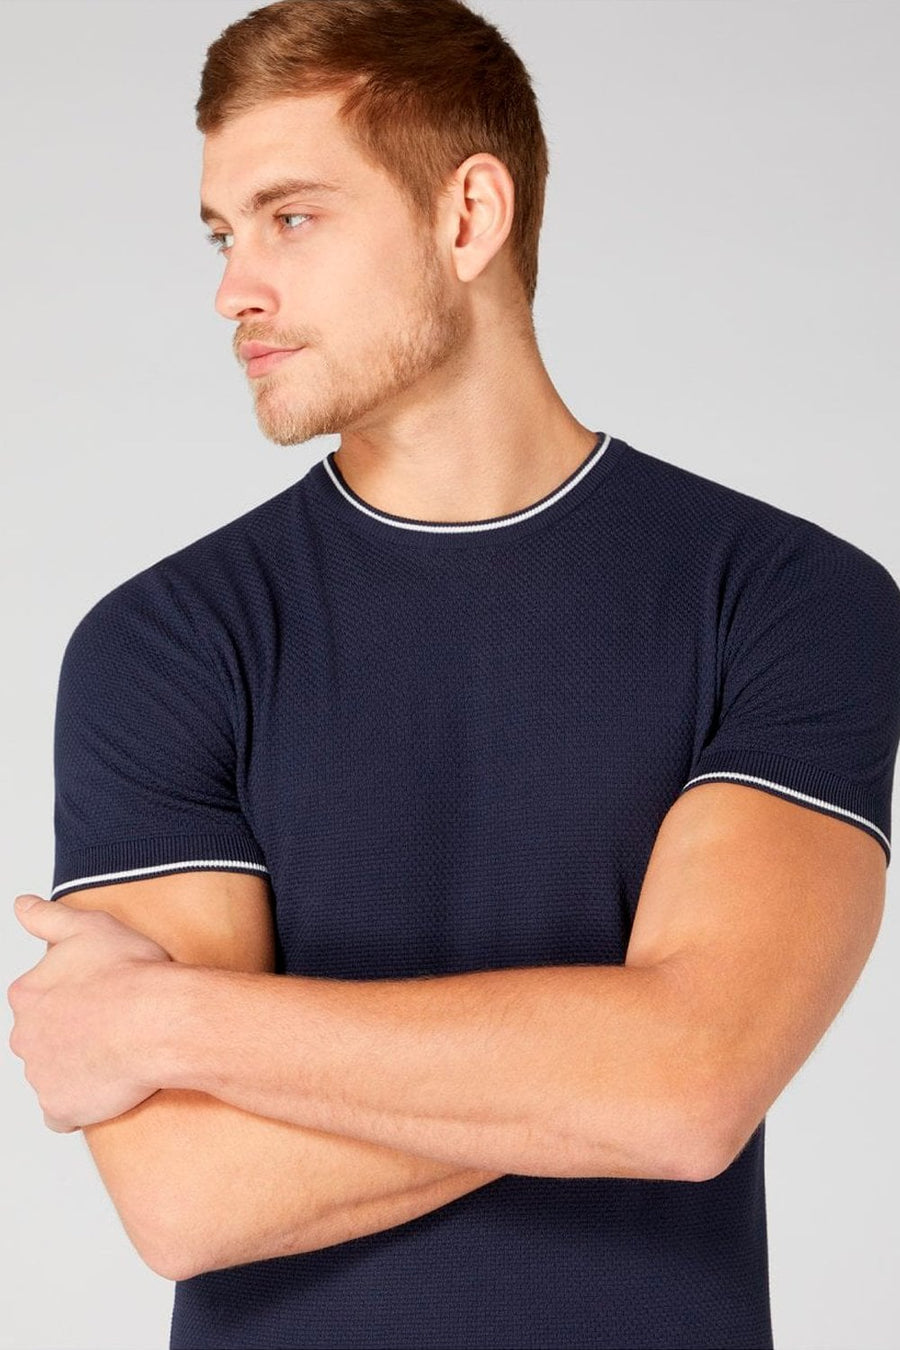 Buy the Remus Uomo Knitted S/S T-Shirt Navy at Intro. Spend £50 for free UK delivery. Official stockists. We ship worldwide.